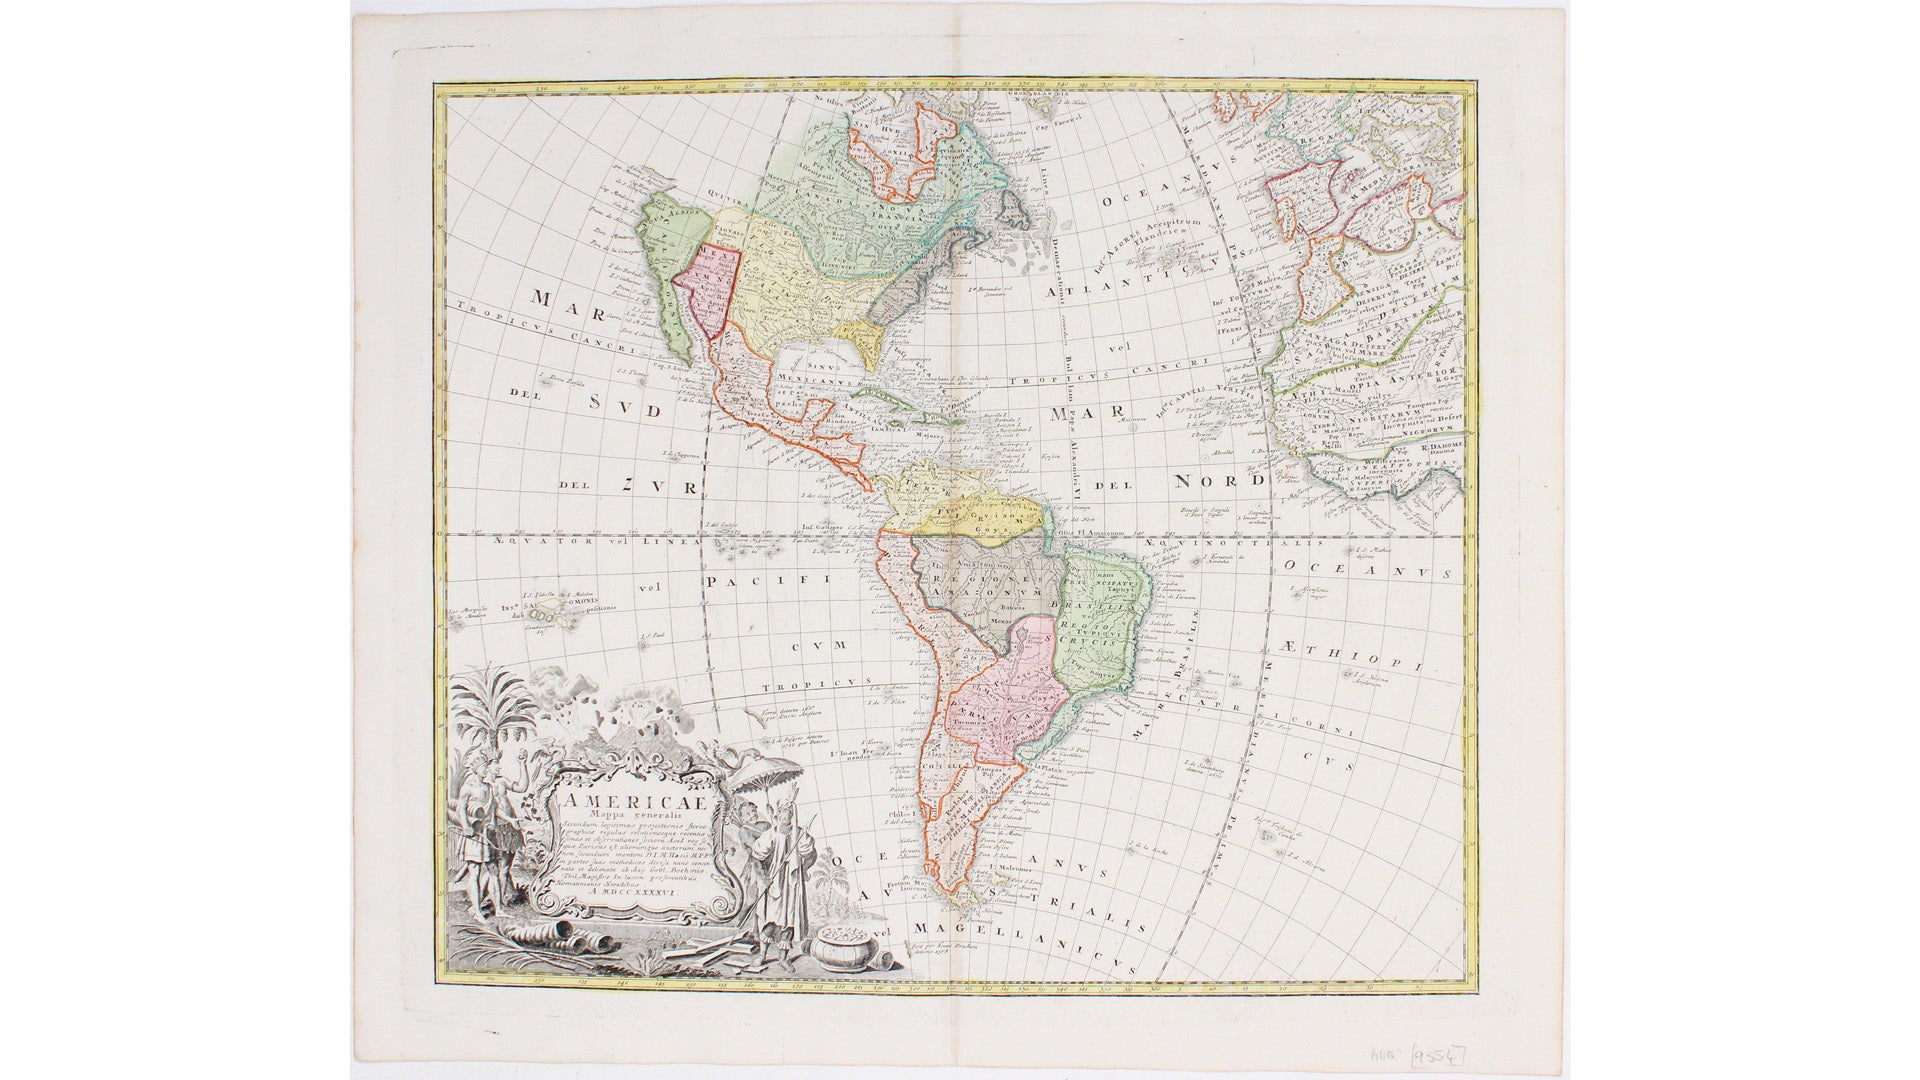 Homann Heirs' Map of the Americas